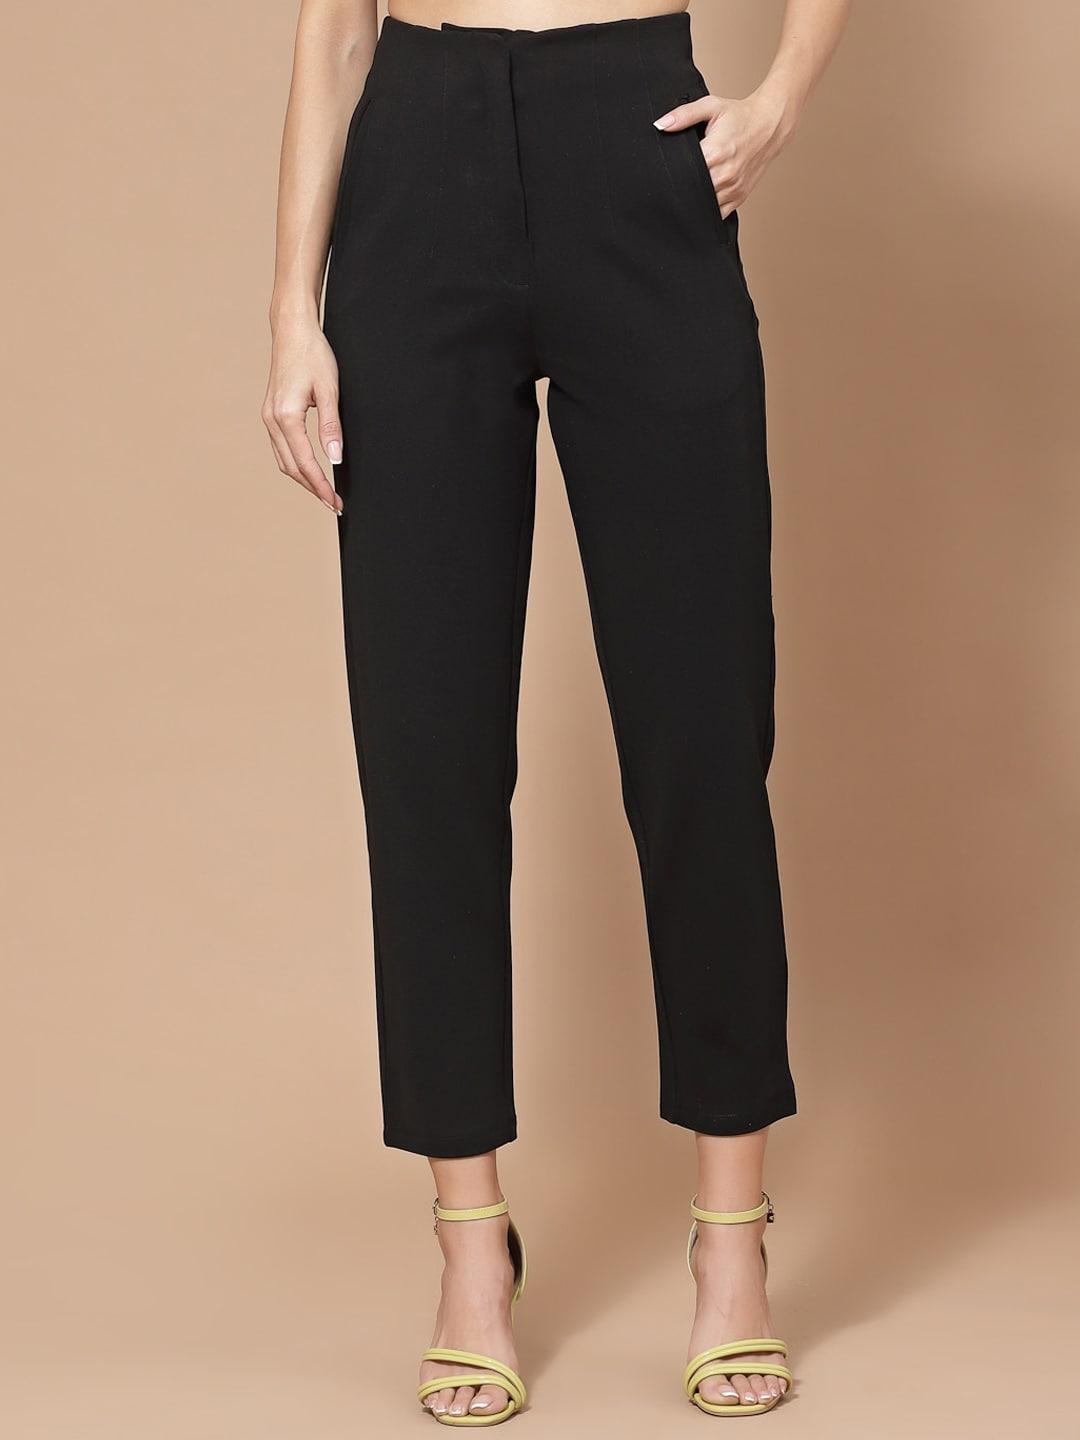 kassually-women-mid-rise-cigarette-trousers